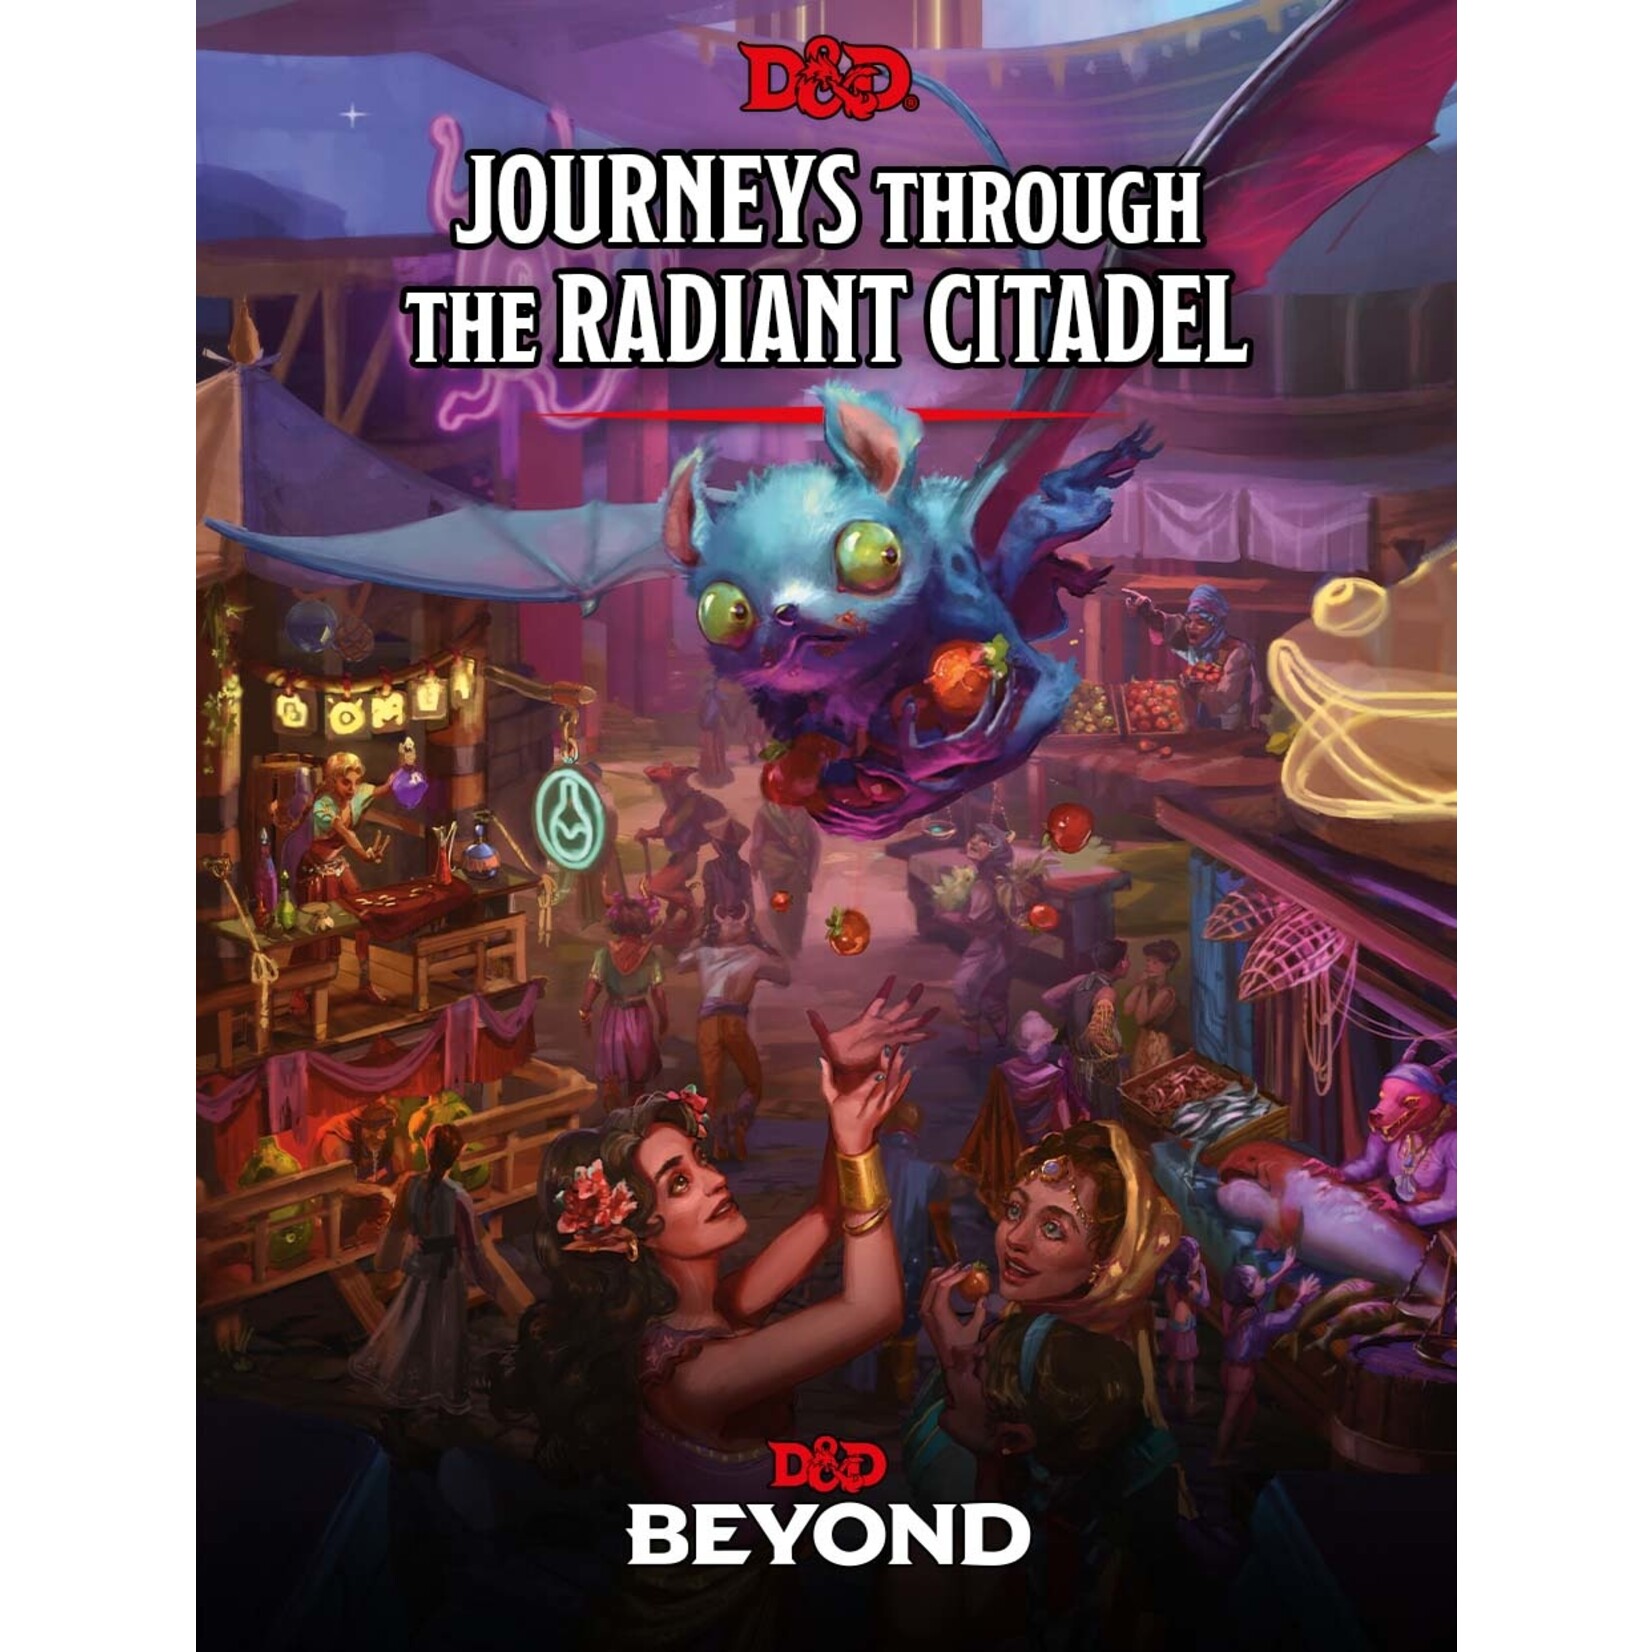 Wizards of the Coast Dungeons & Dragons RPG: Journeys Through the Radiant Citadel Hard Cover